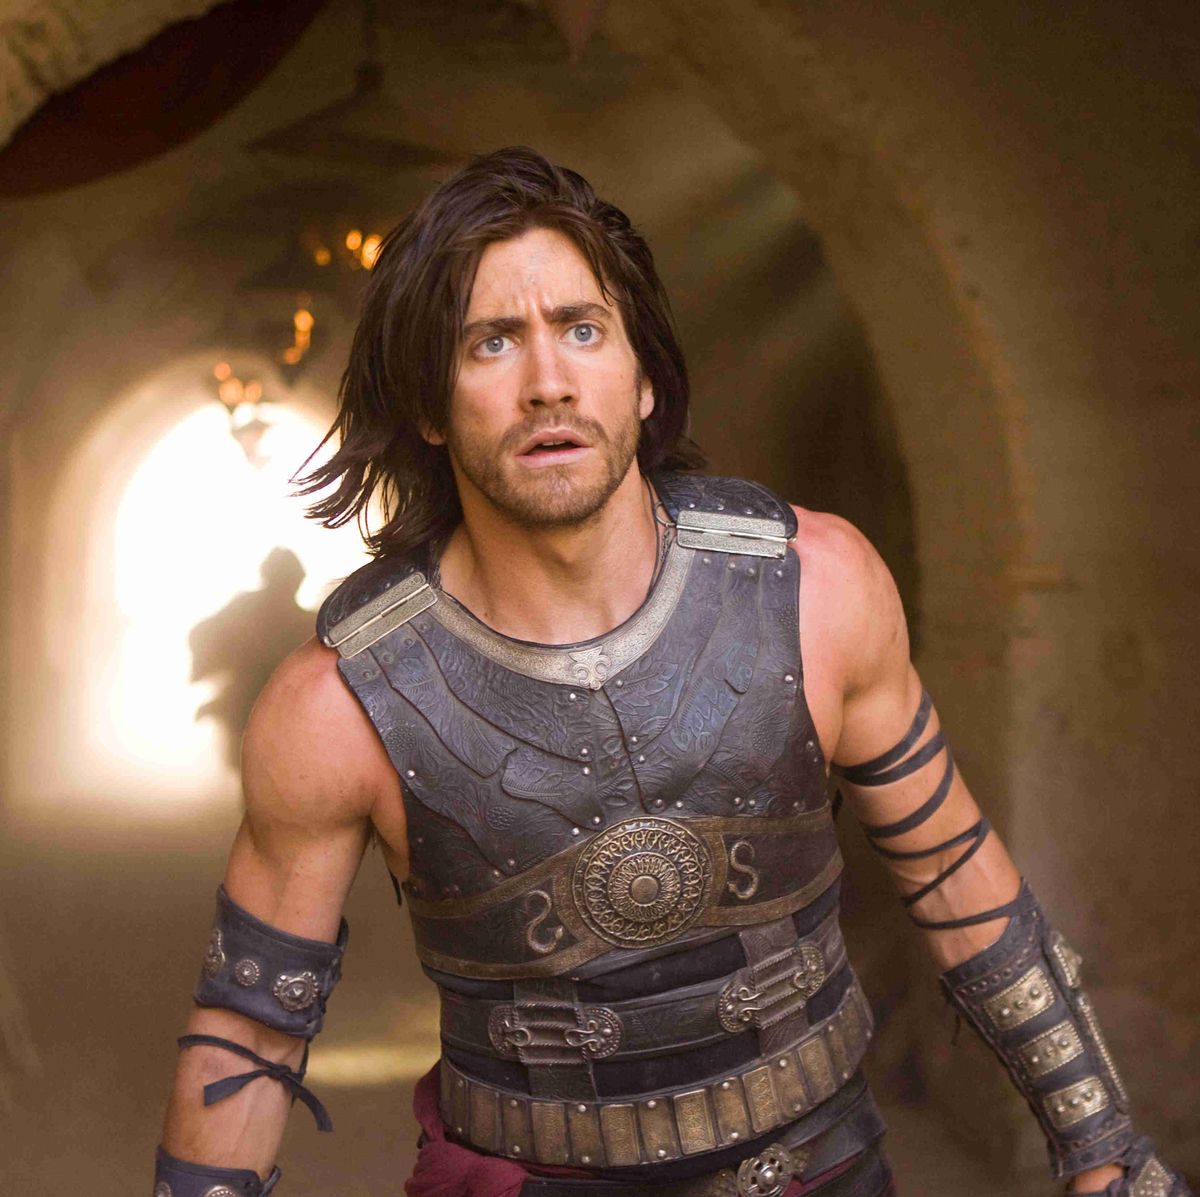 Jake Gyllenhaal “Learned a Lot” from Prince of Persia Whitewashing